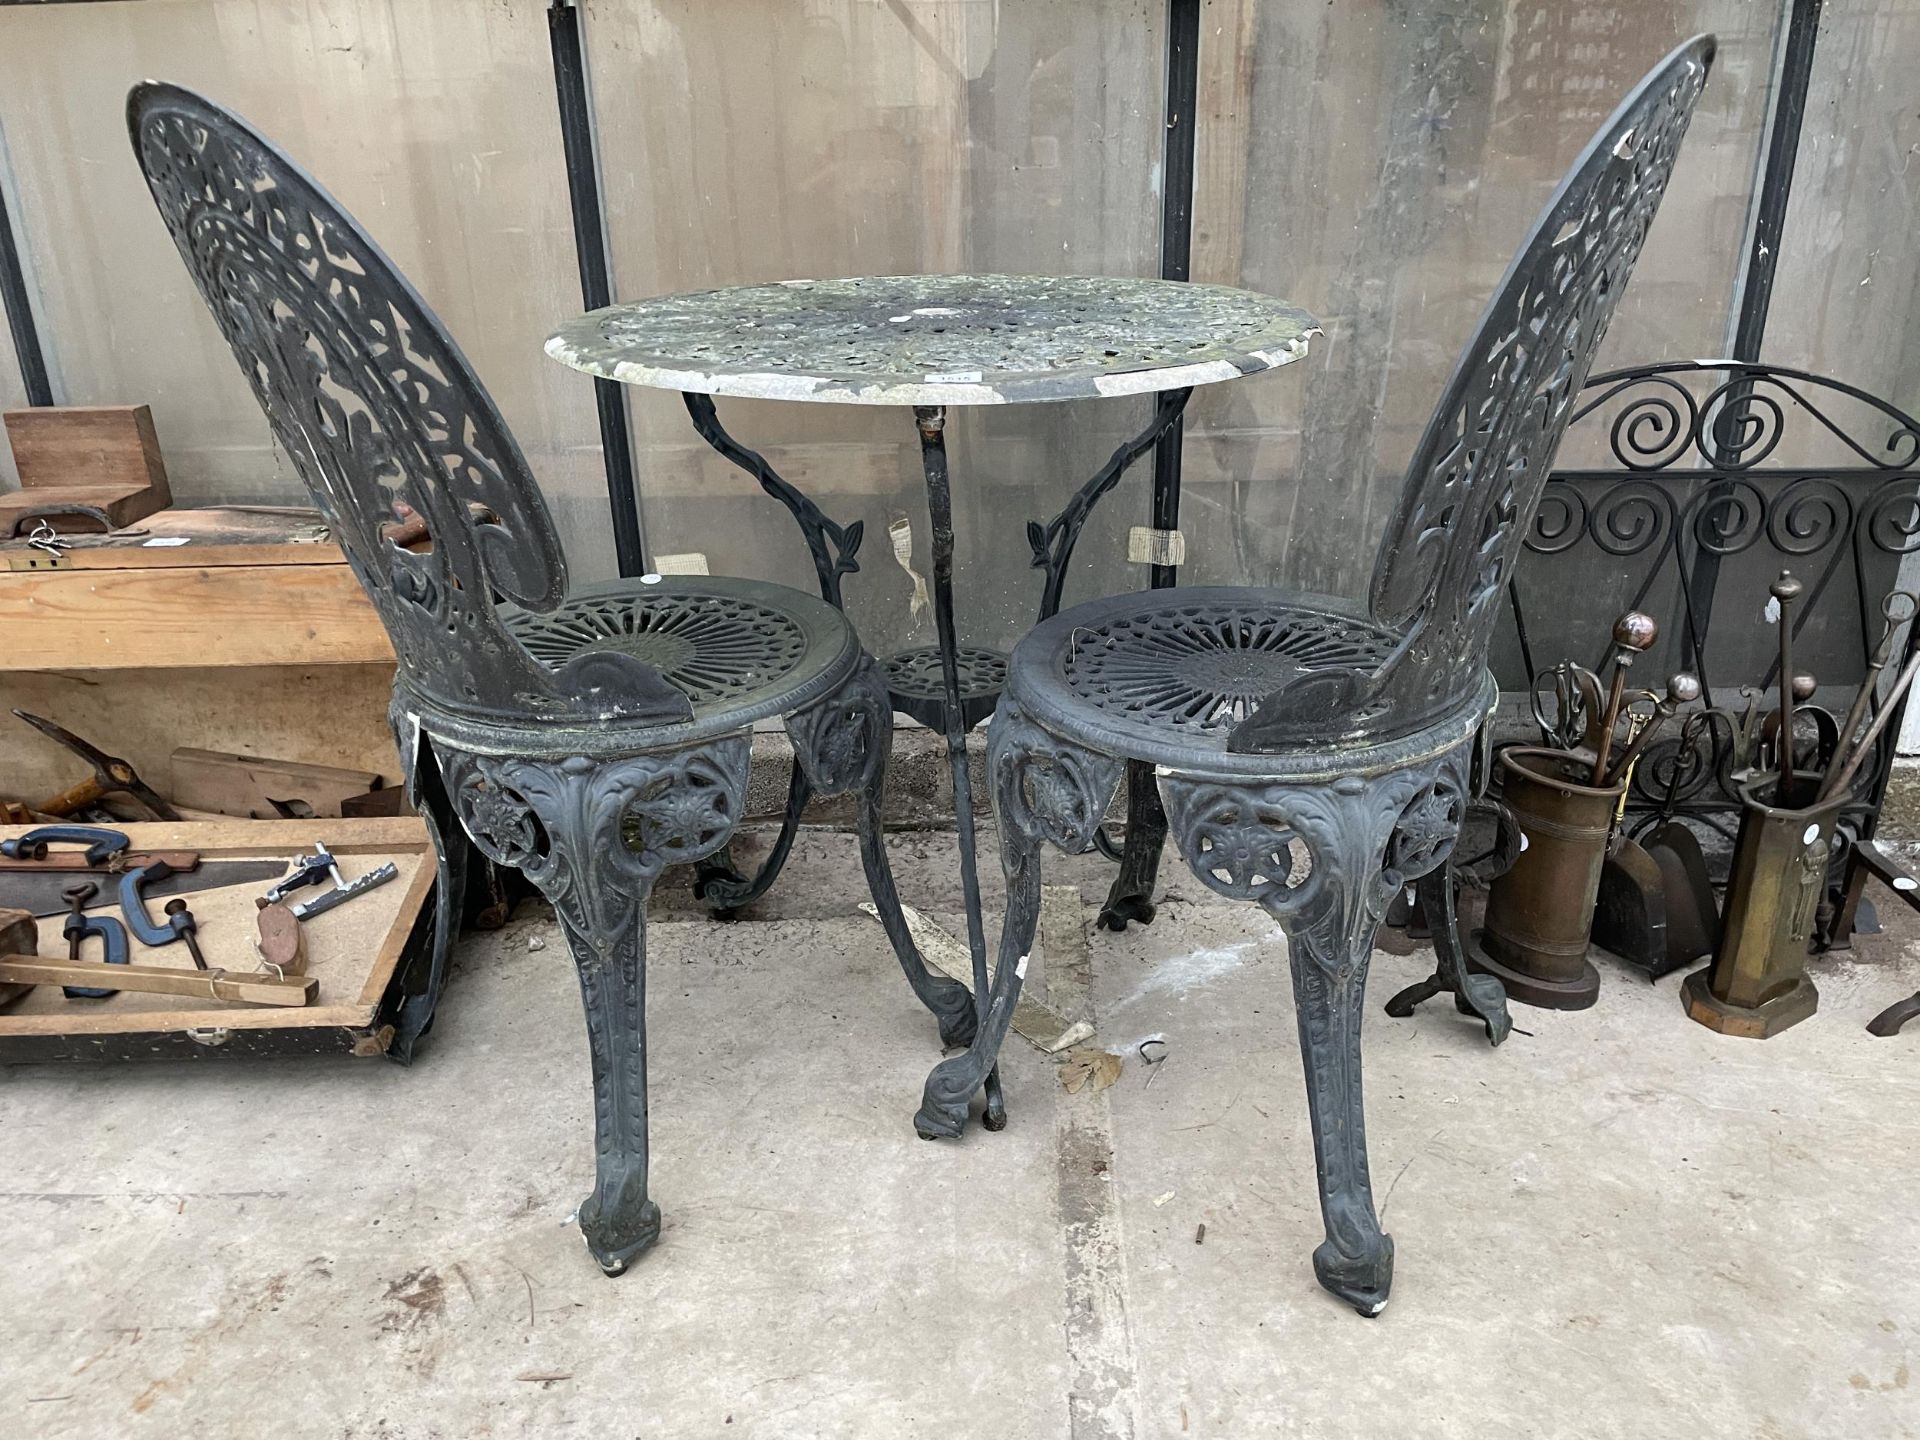 A CAST ALLOY BISTRO SET COMPRISING OF A ROUND TABLE AND TWO CHAIRS - Image 2 of 2